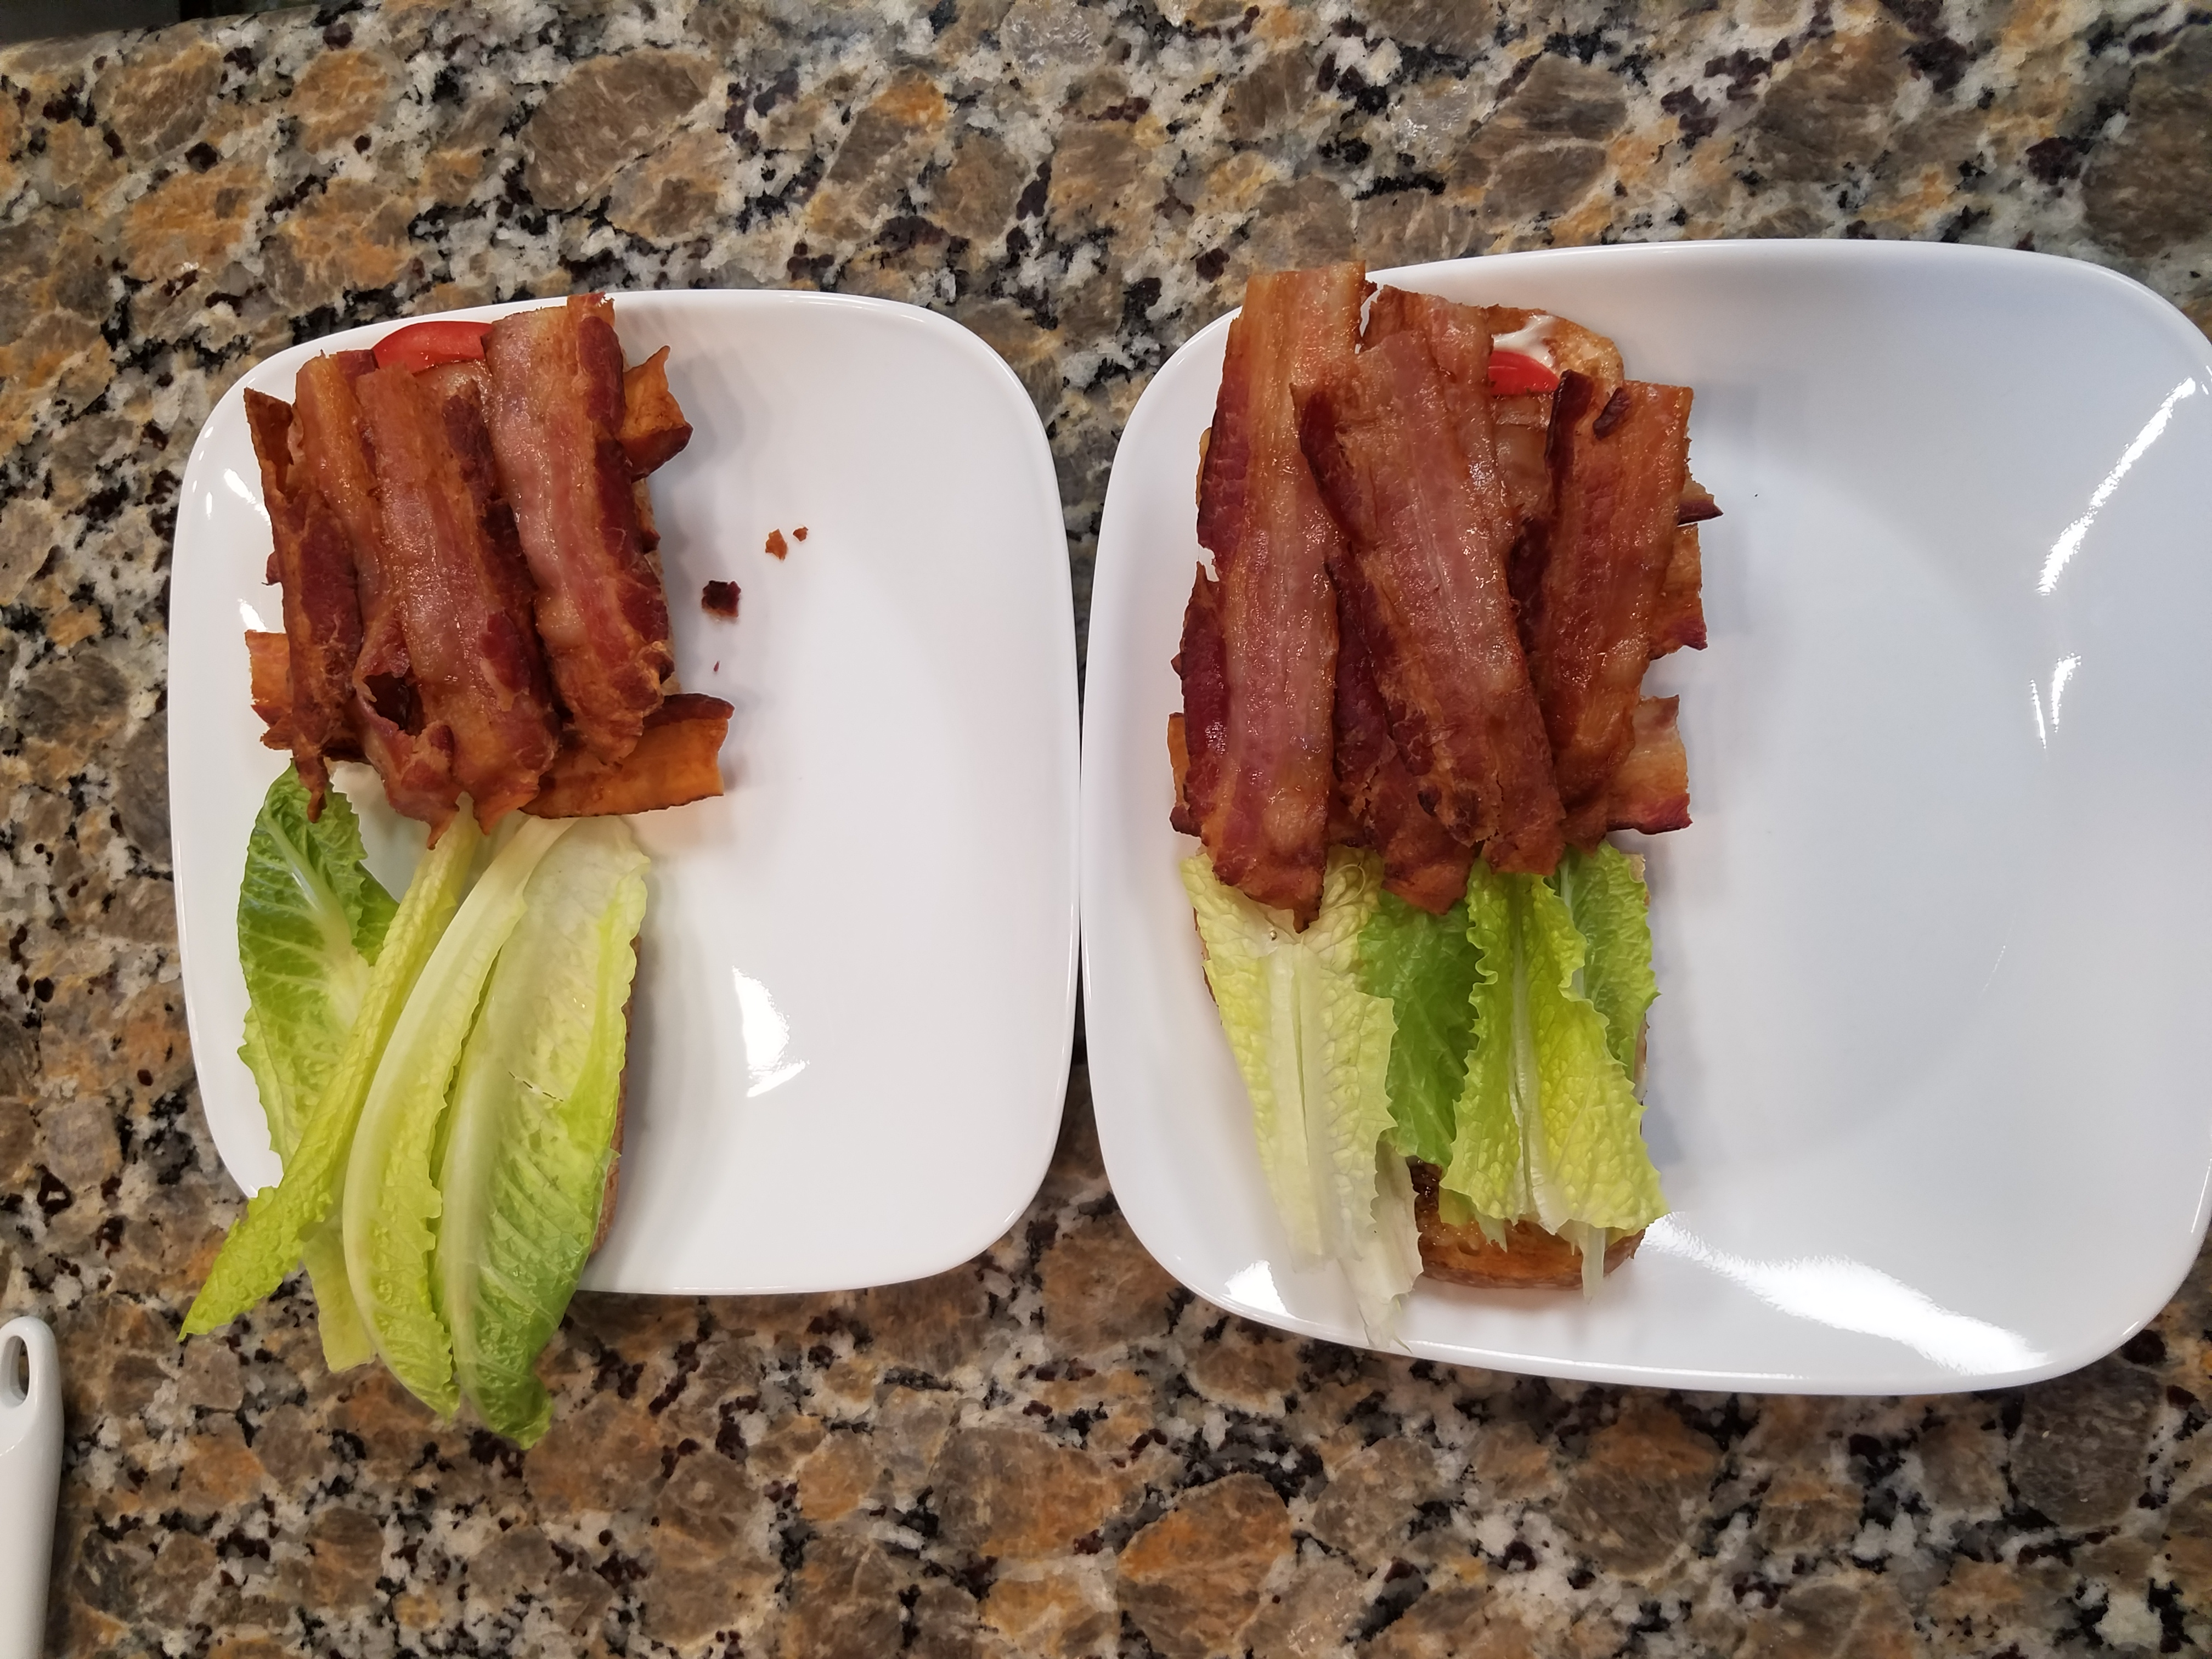 Bacon for the BLT